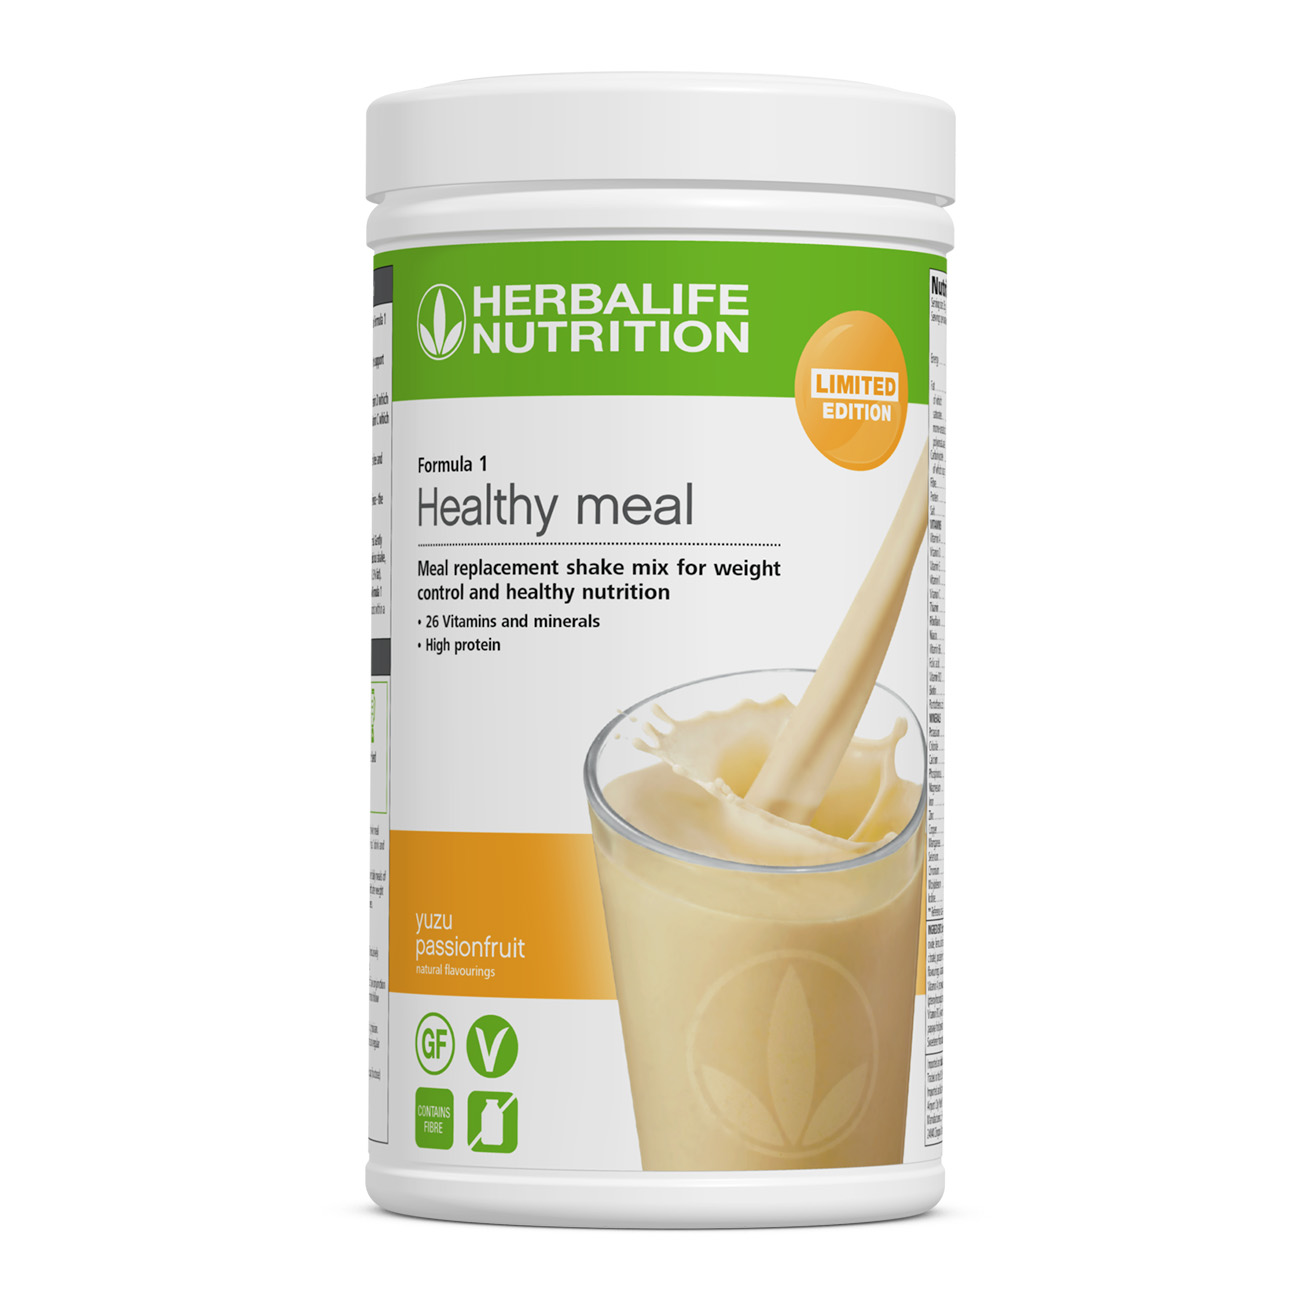 Limited edition F1 Yuzu Passionfruit flavour. It is a healthy meal replacement shake, high in protein and balanced with vitamins and minerals plus fats.